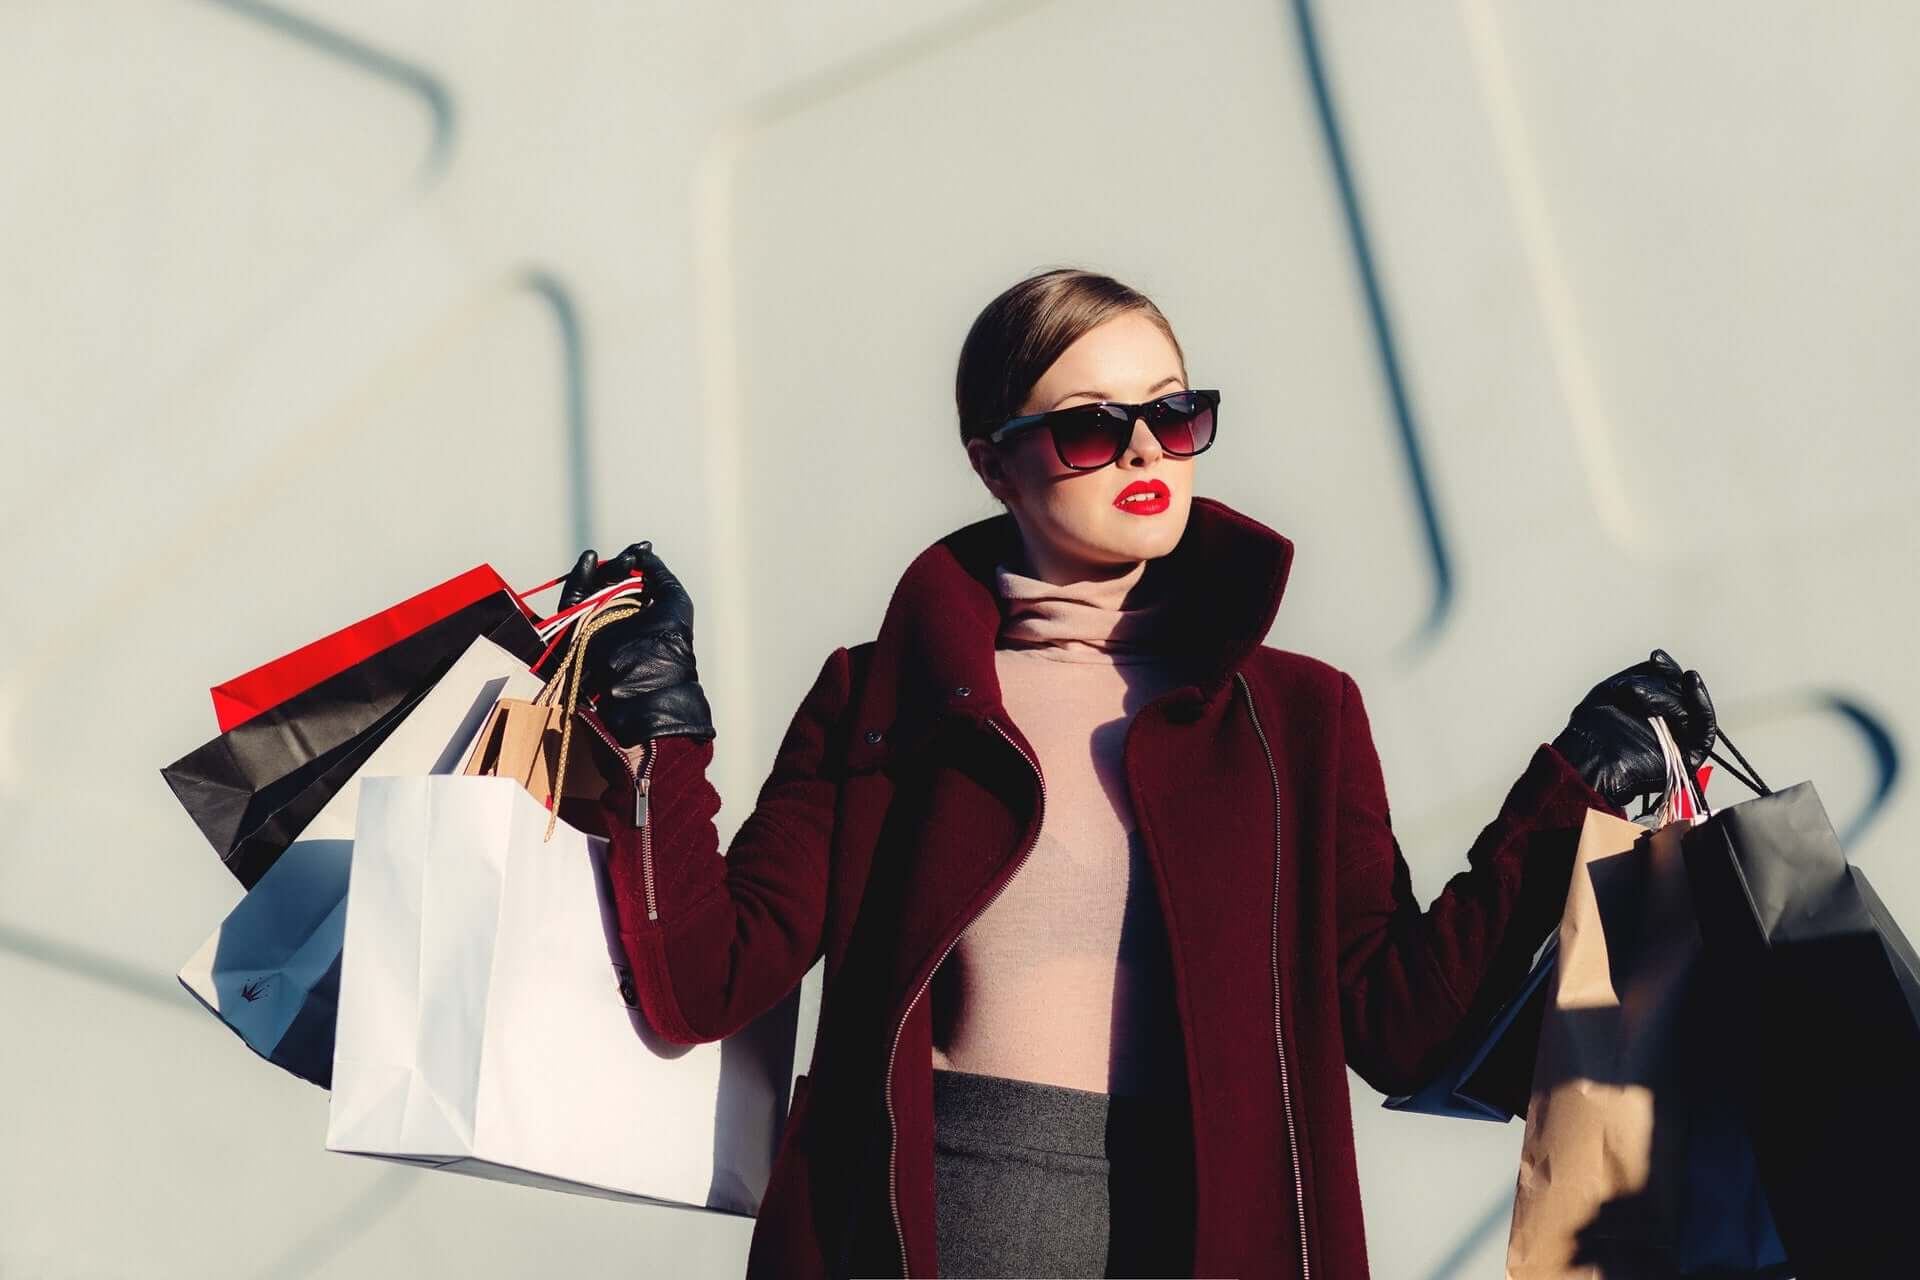 A woman in a burgandy coat, pink sweater, and sunglasses holds a variety of shopping bags as she poses.